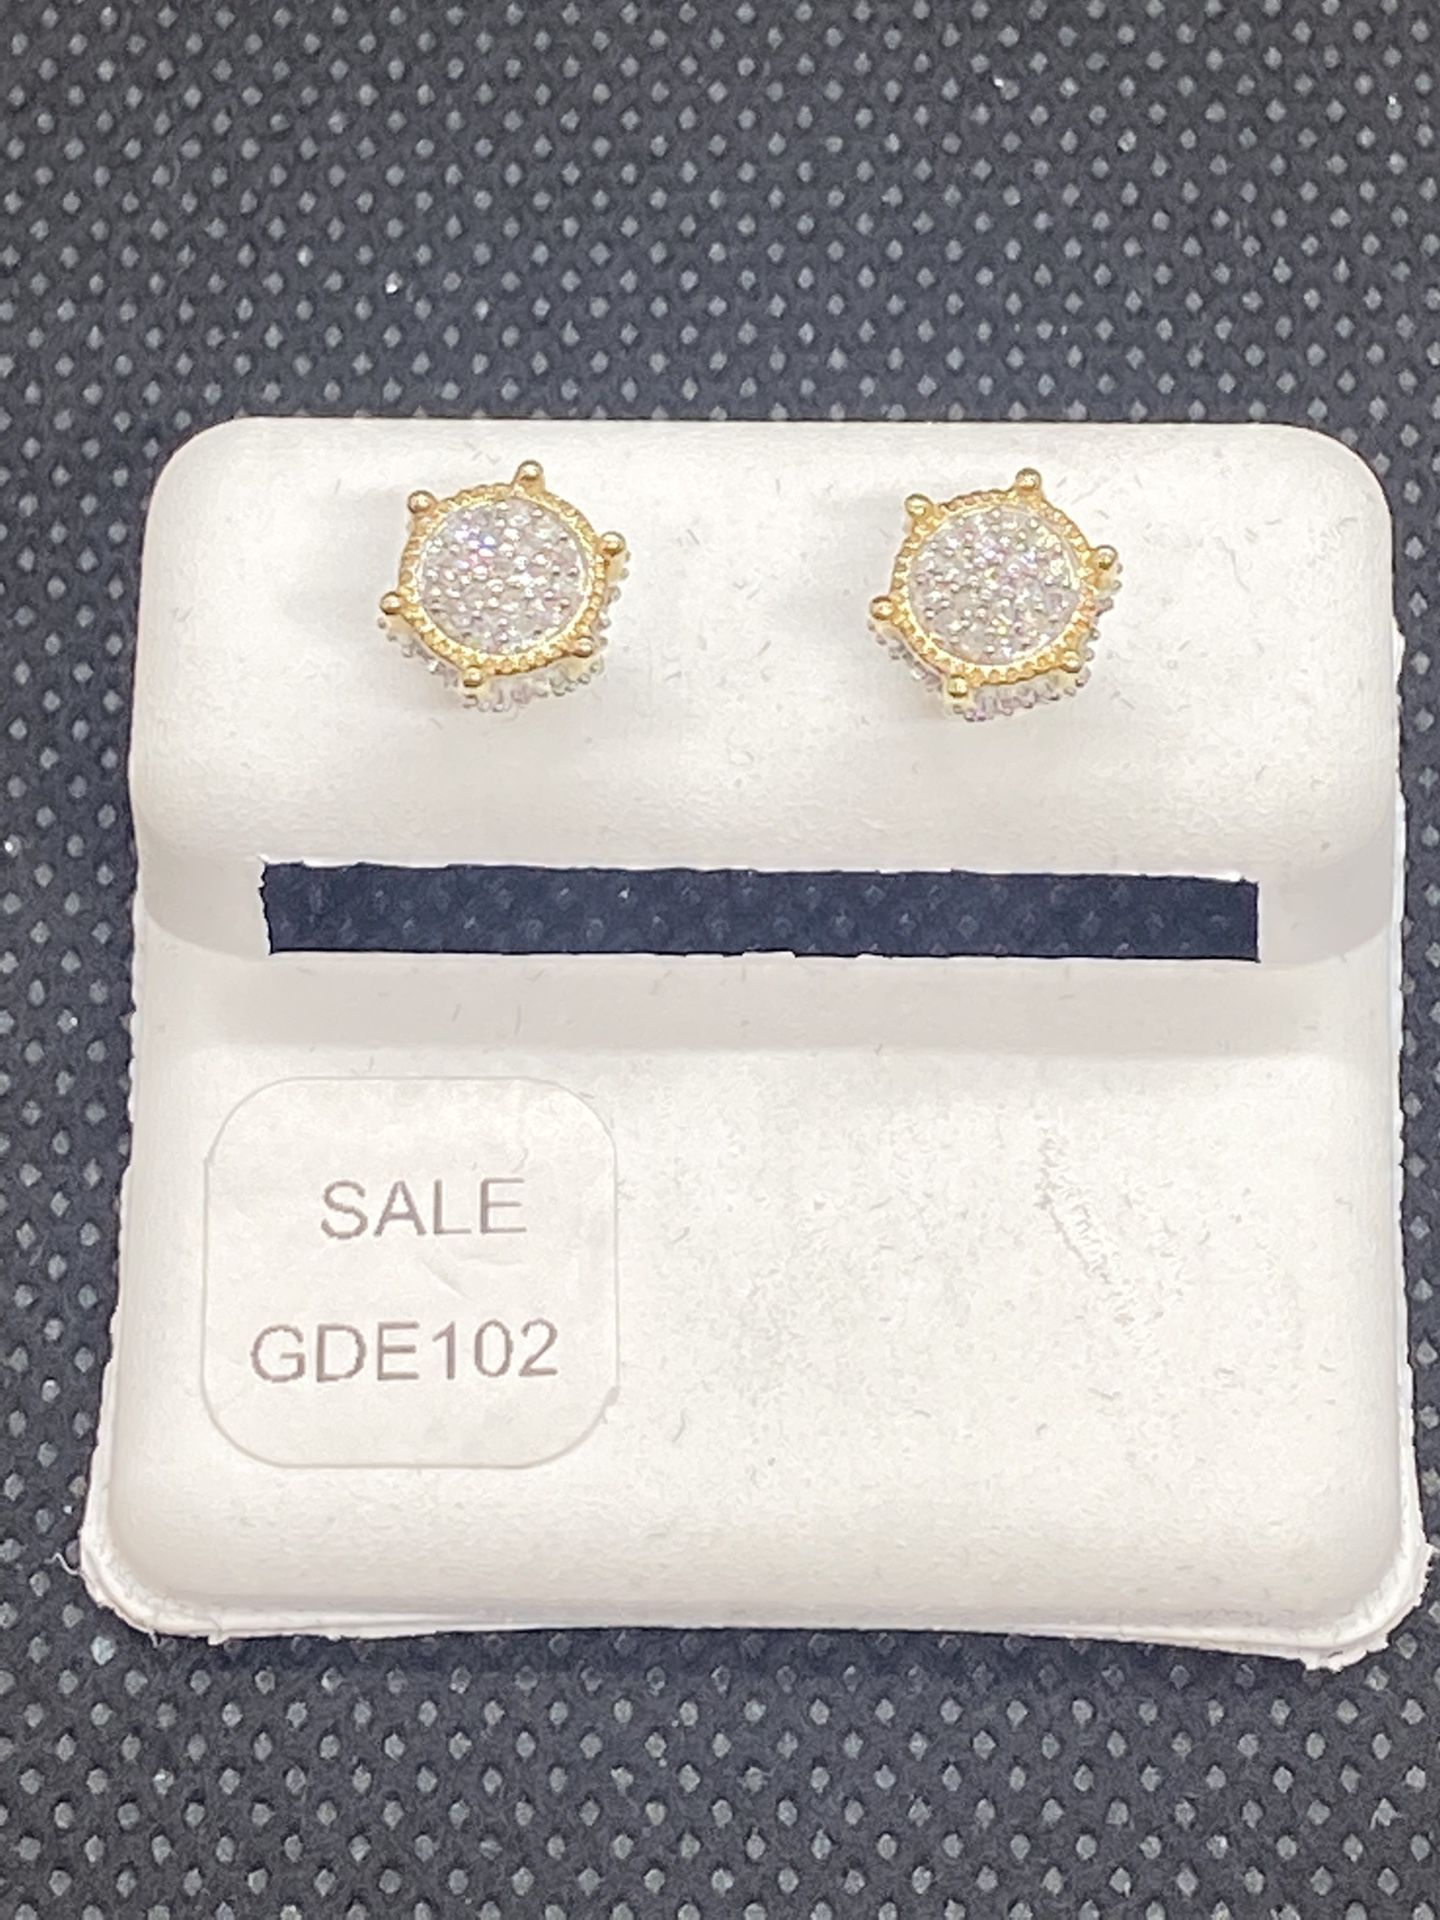 10KT GOLD AND DIAMOND EARRINGS OF 0.25 CTW AVAILABLE ON SPECIAL SALE 